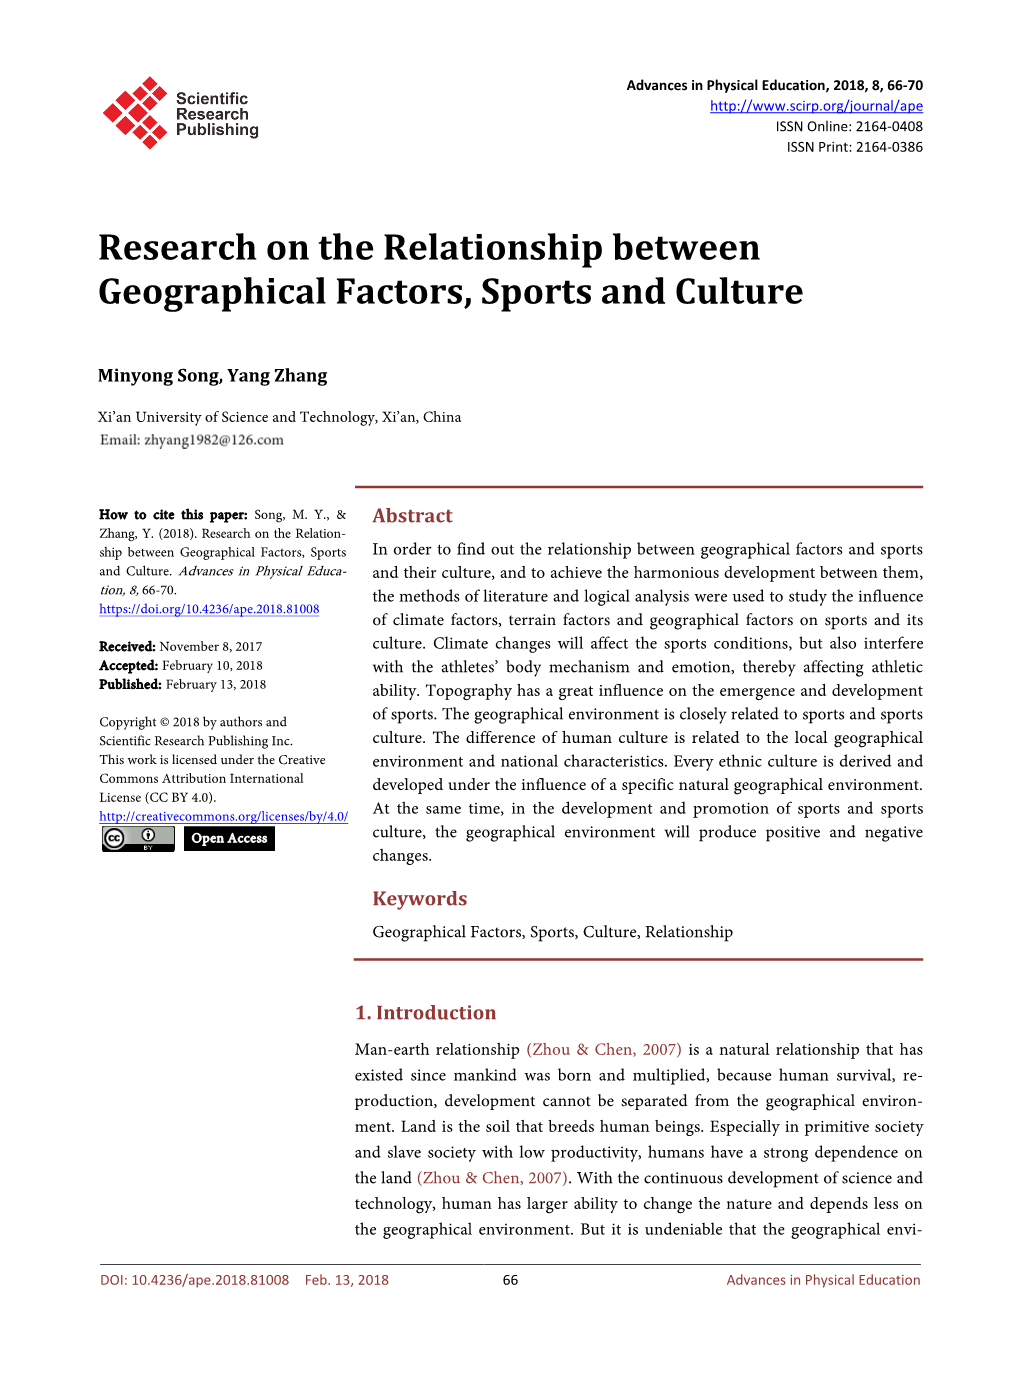 Research on the Relationship Between Geographical Factors, Sports and Culture